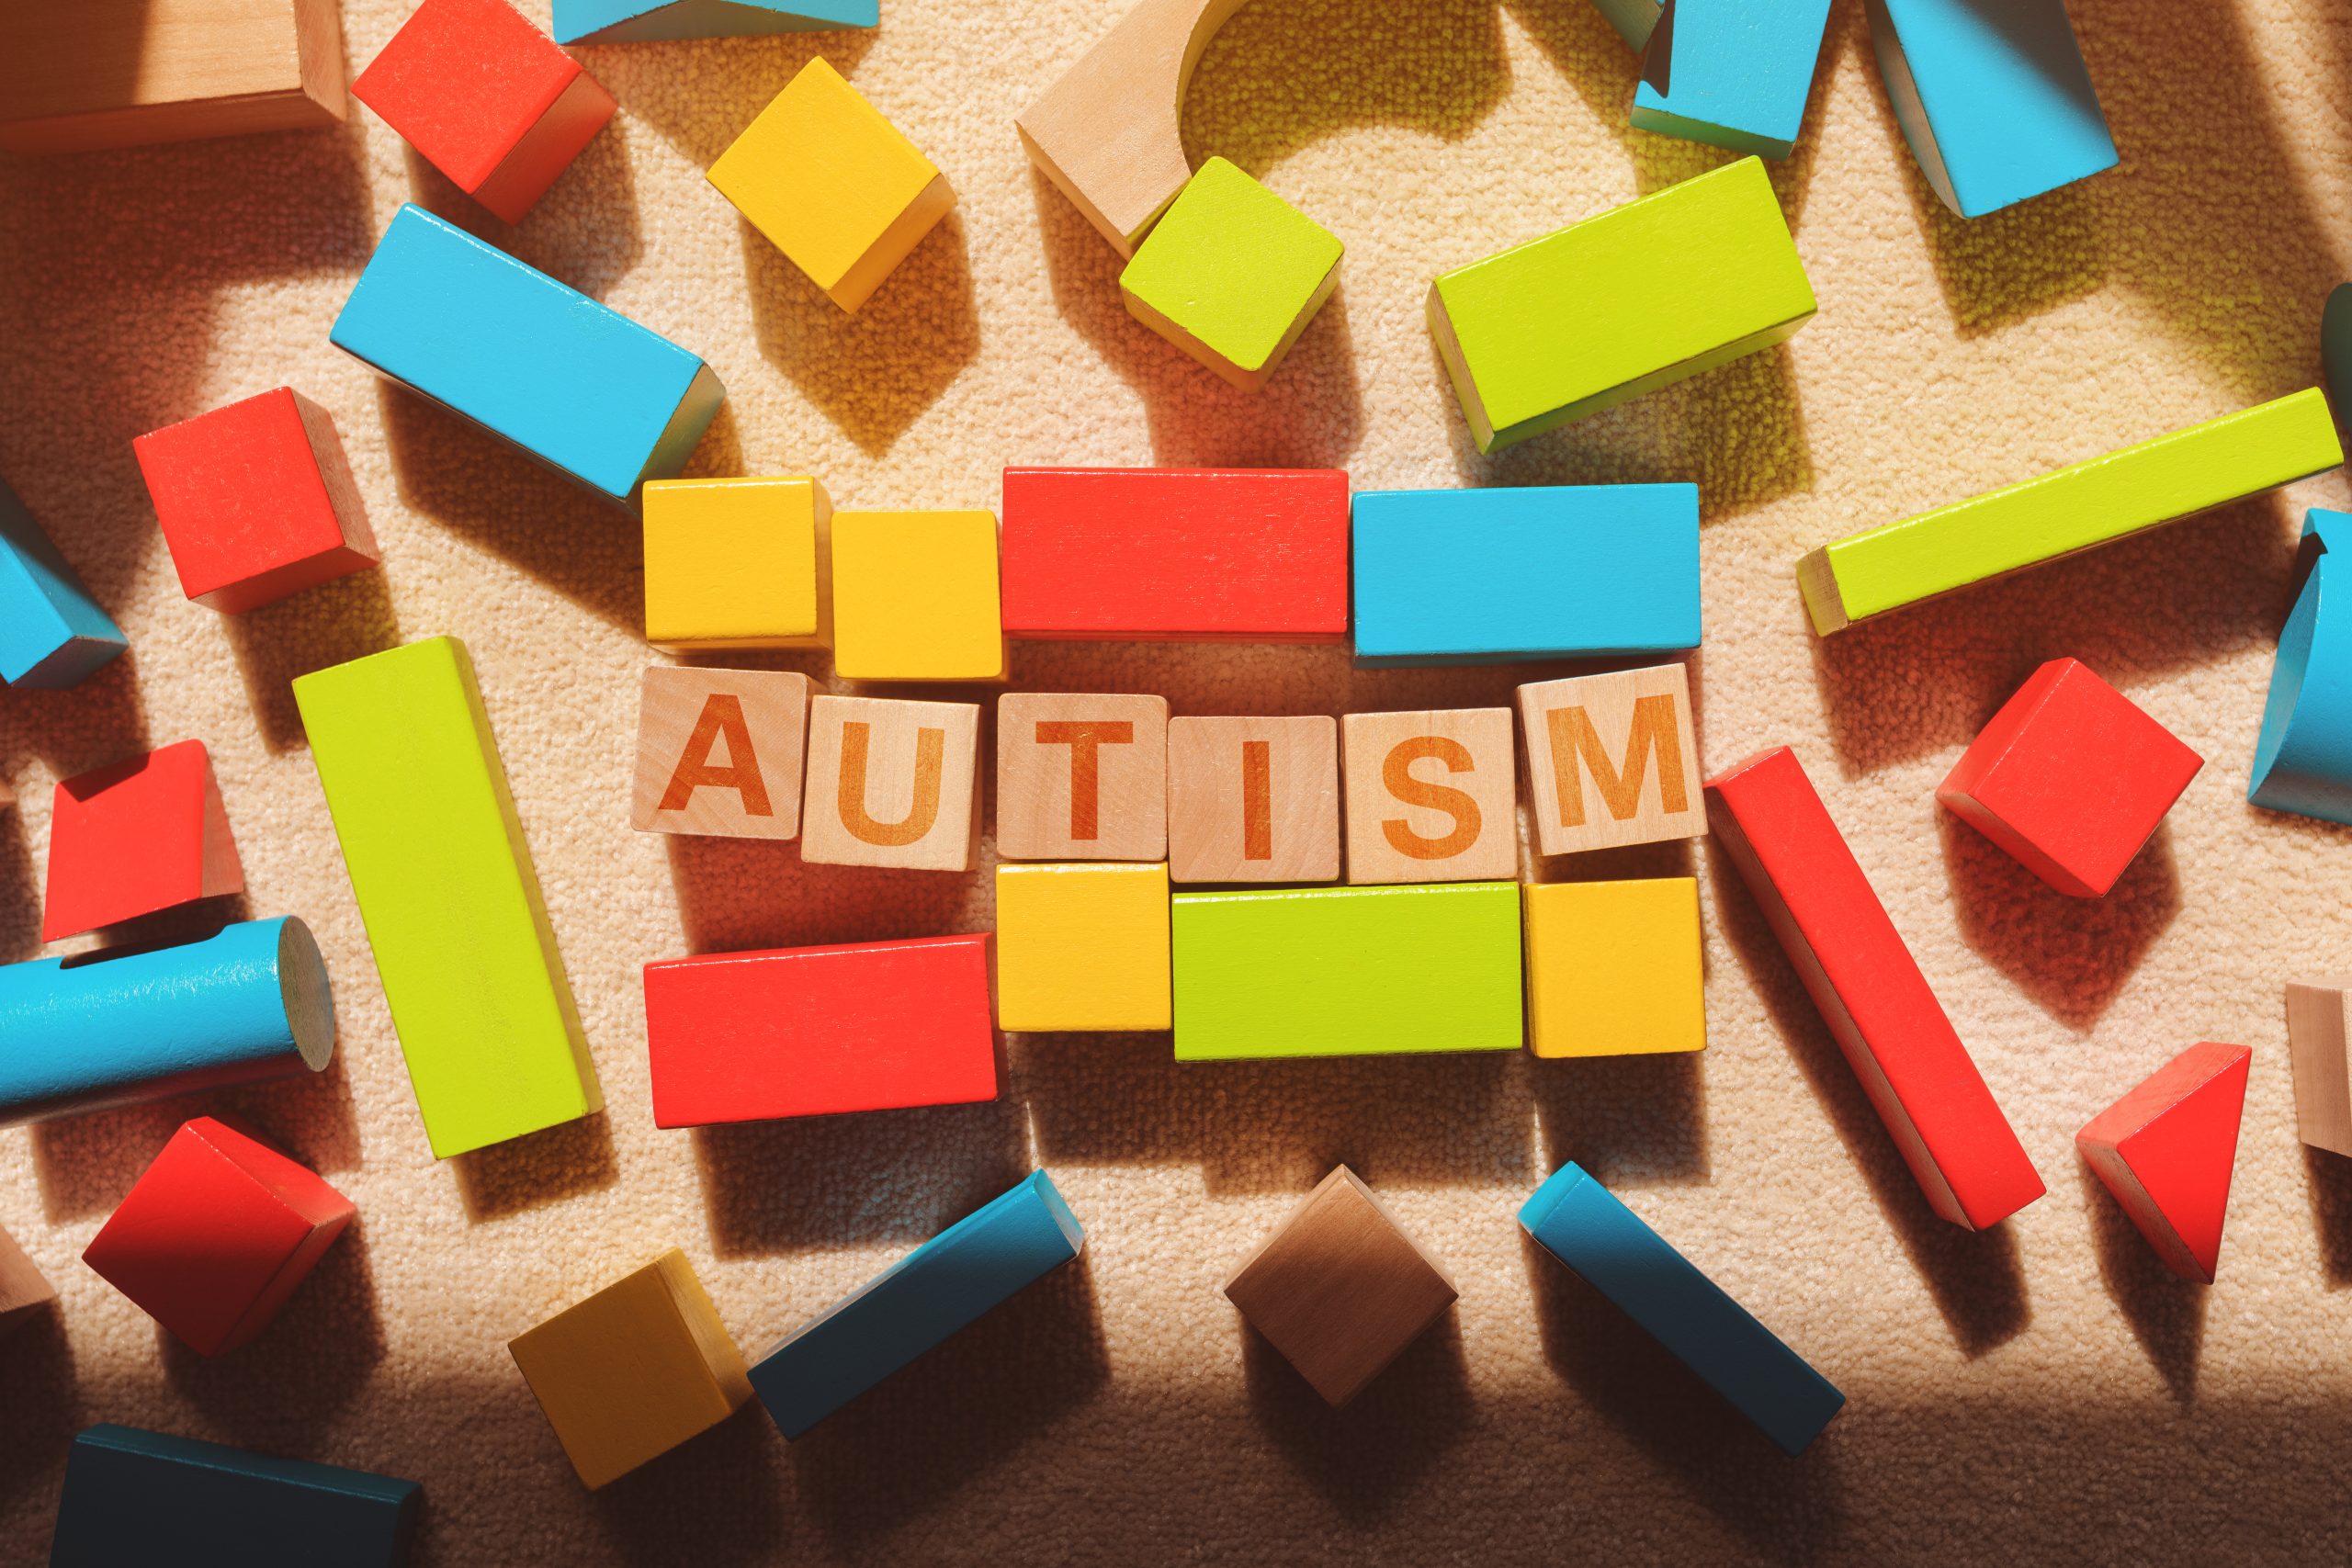 How Autism Affects Family Life